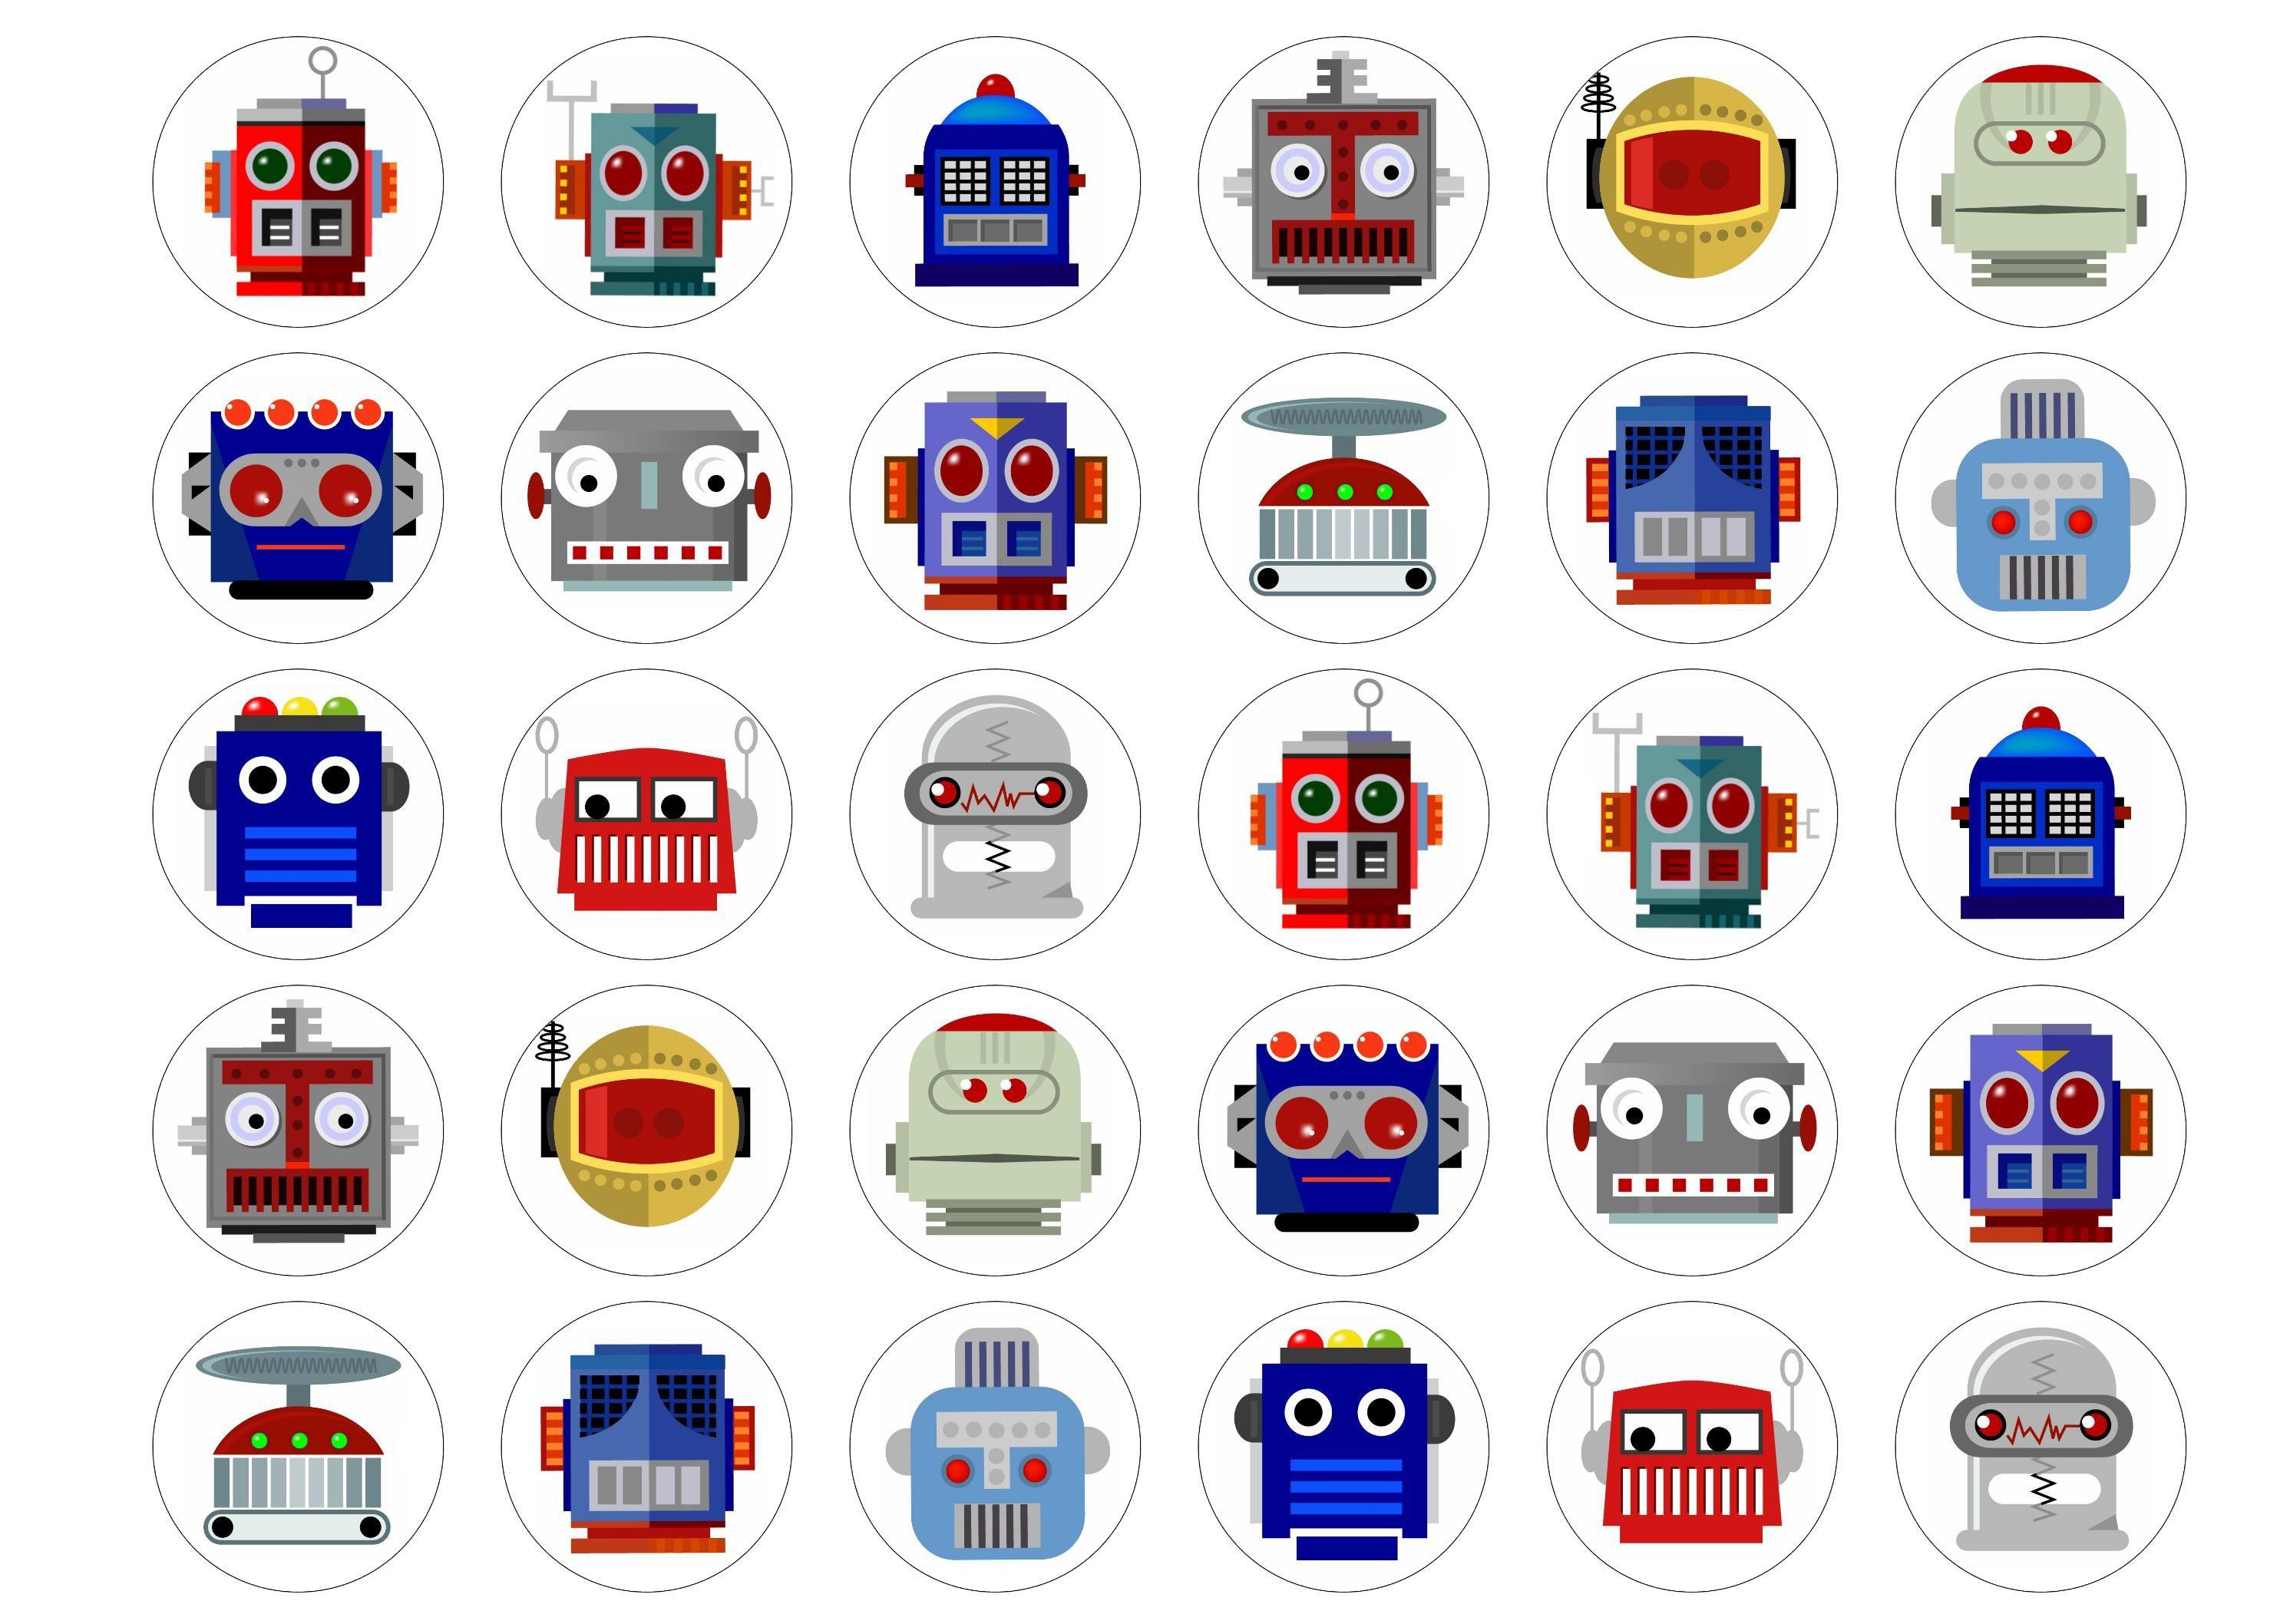 30 edible cupcake toppers with fun Robot images